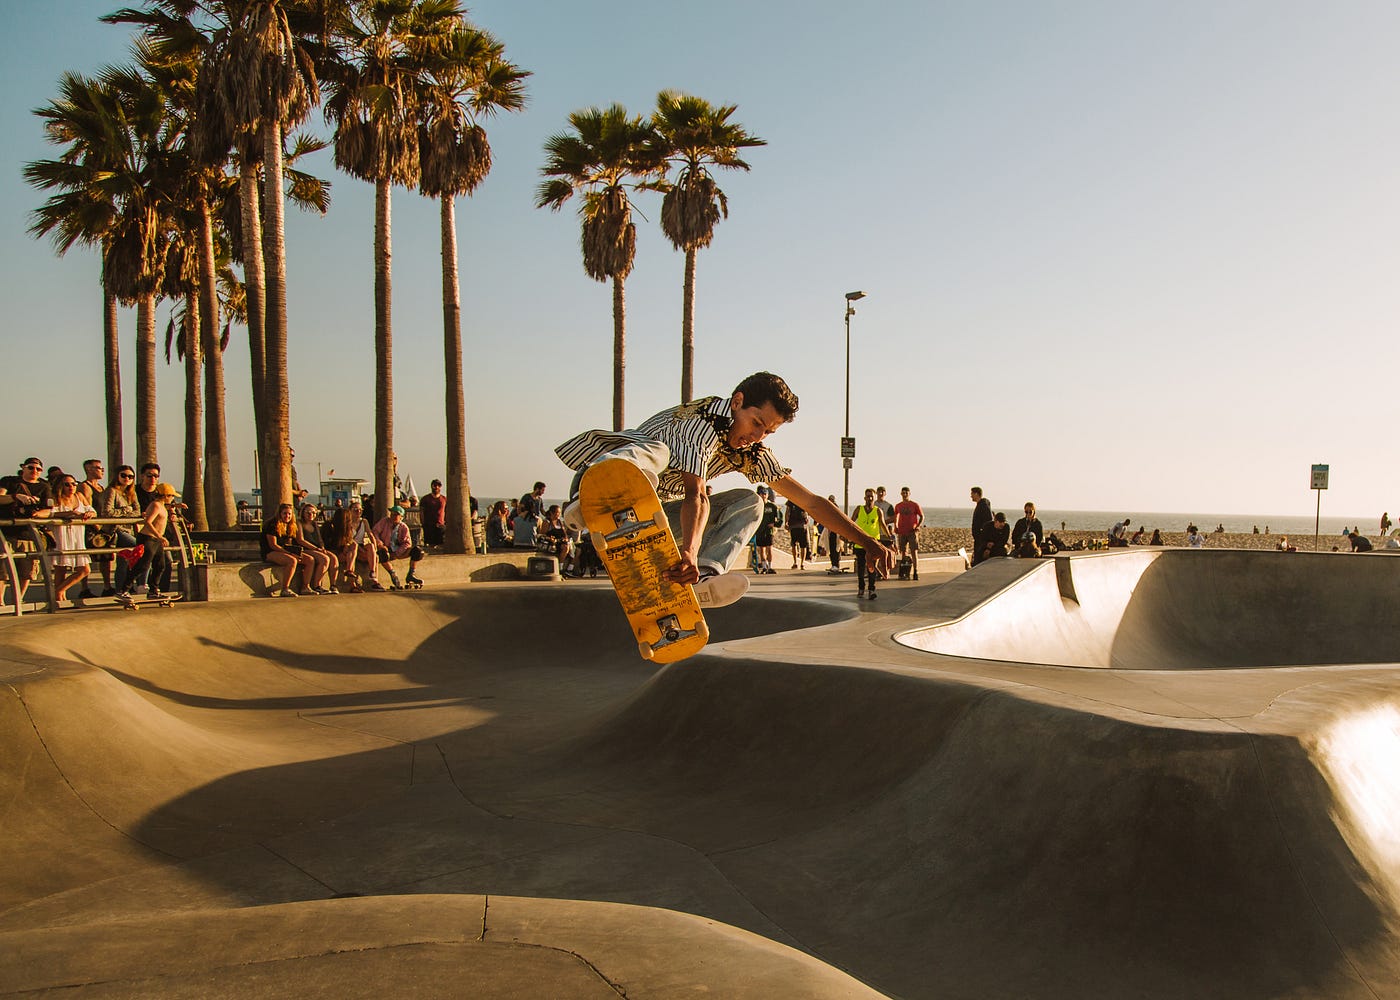 L.A. skaters find creative inspiration and practice self-care at